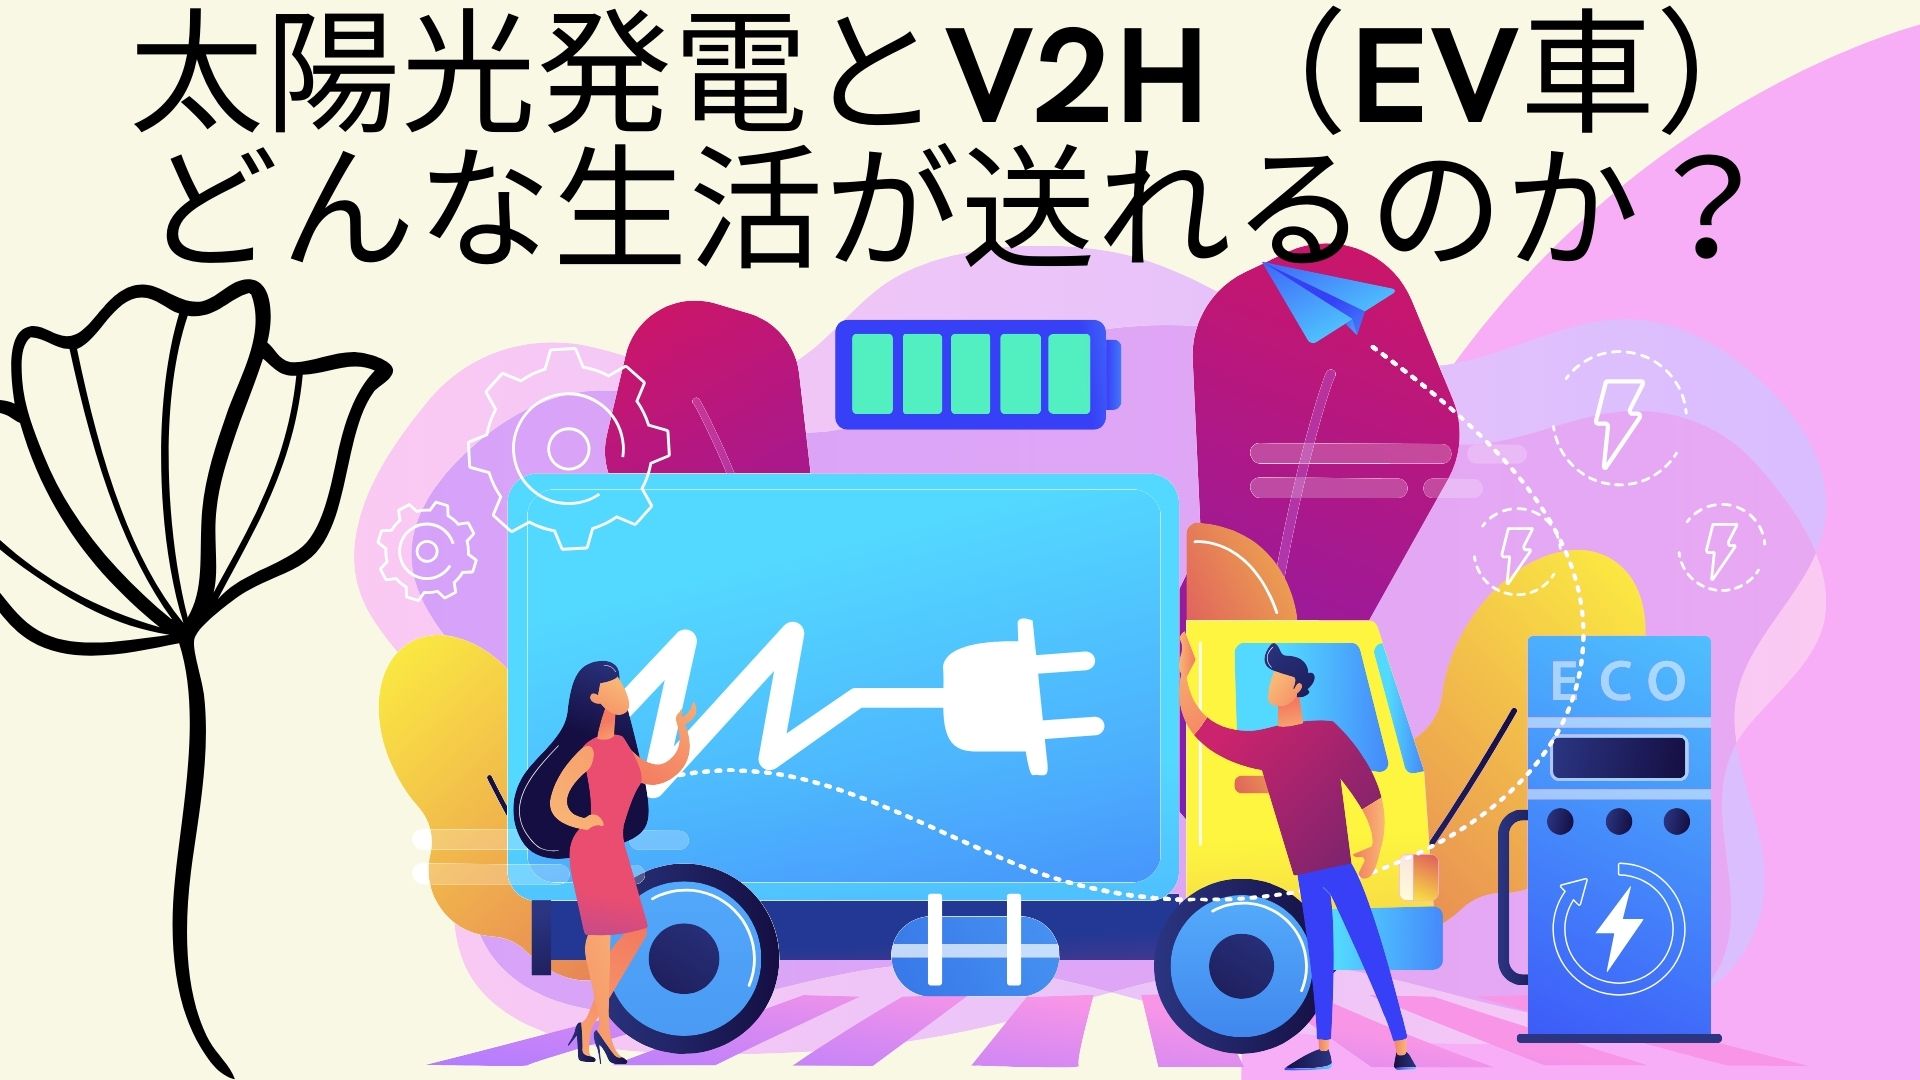 life-with-photovoltaic-power-generation-and-V2H-and-electric-car-in-tokyo-electric-power-area